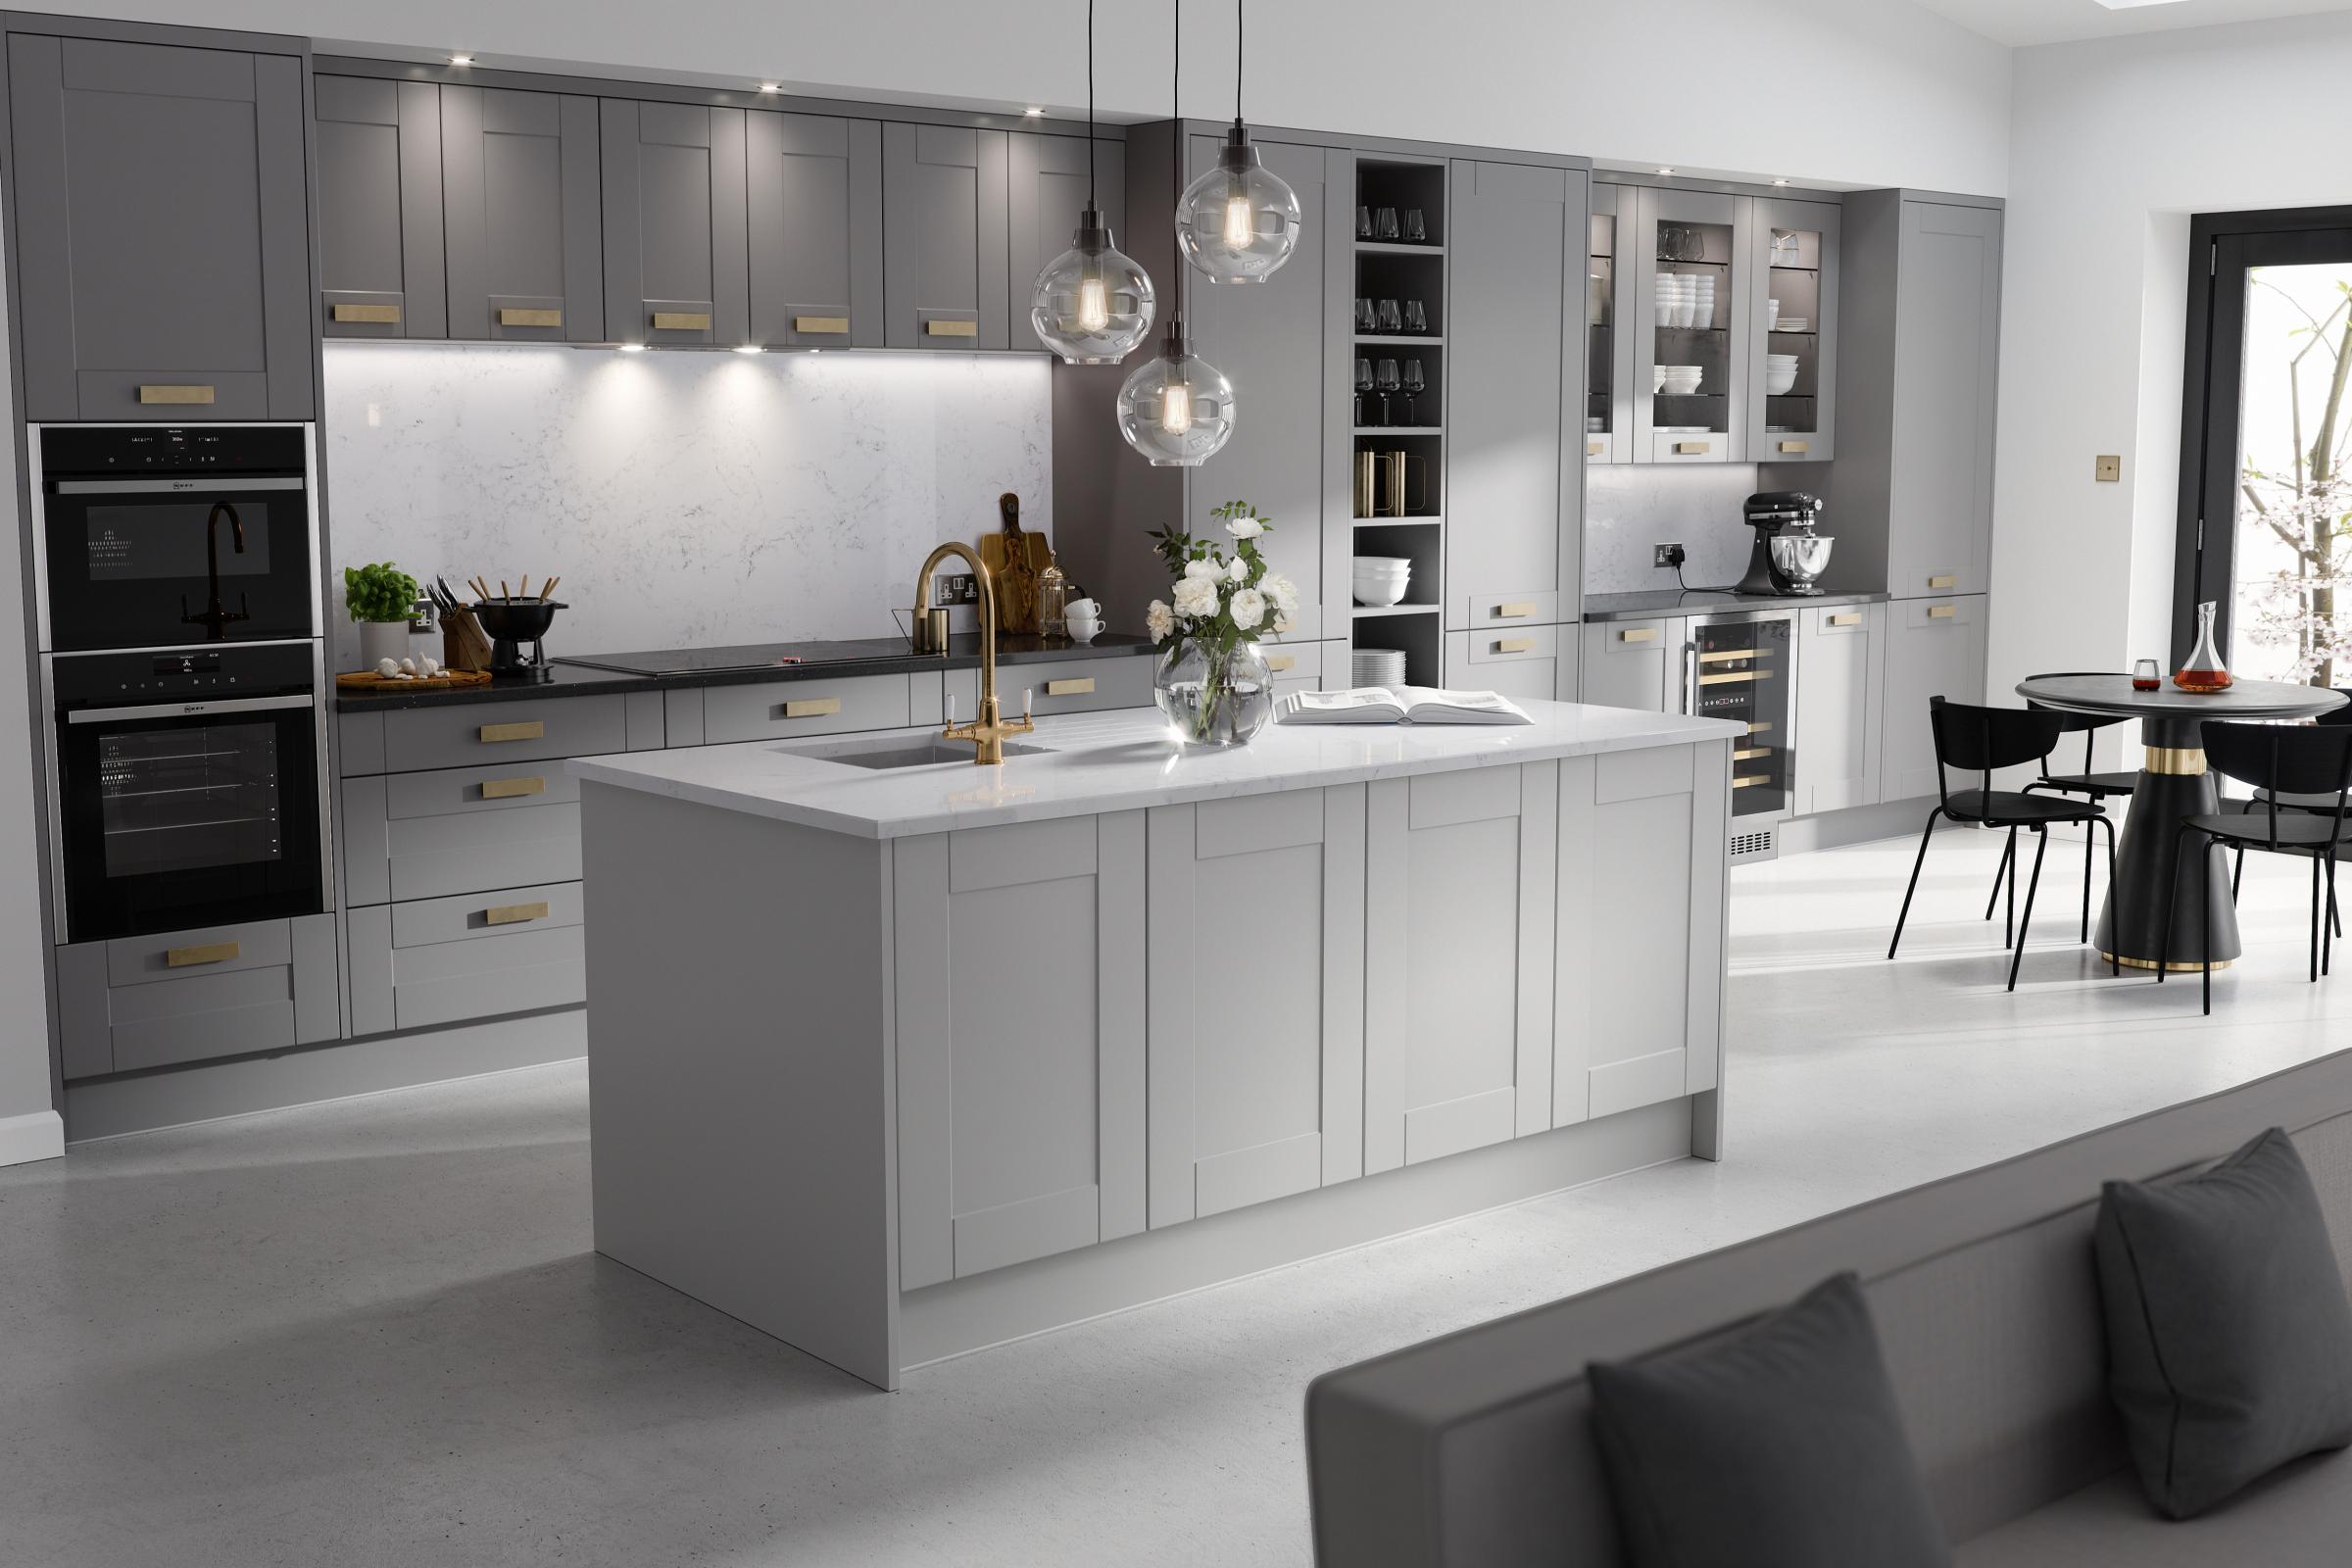 Wren Kitchens Set To Open Its Doors At St Michael S Retail Park Andover Advertiser